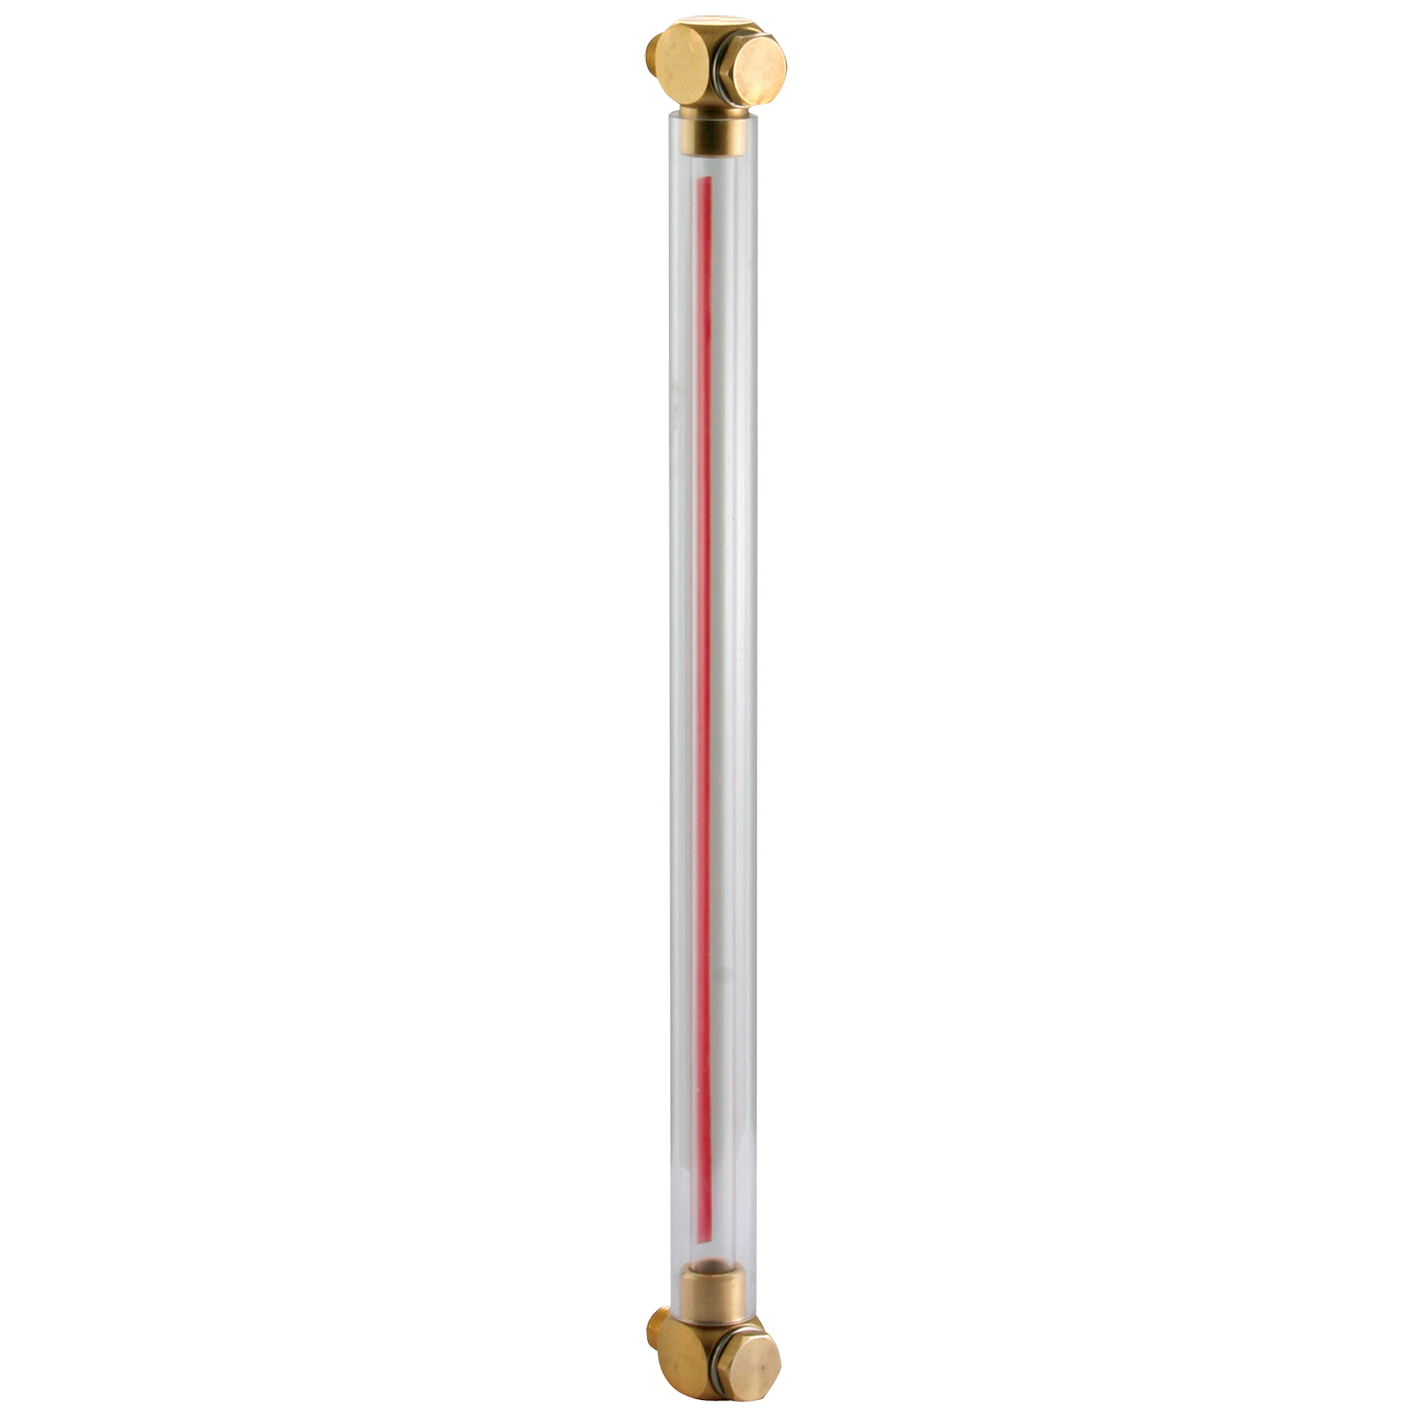 1/4" BSP Fluid Level Gauge W/O Thermometer Centres 100mm